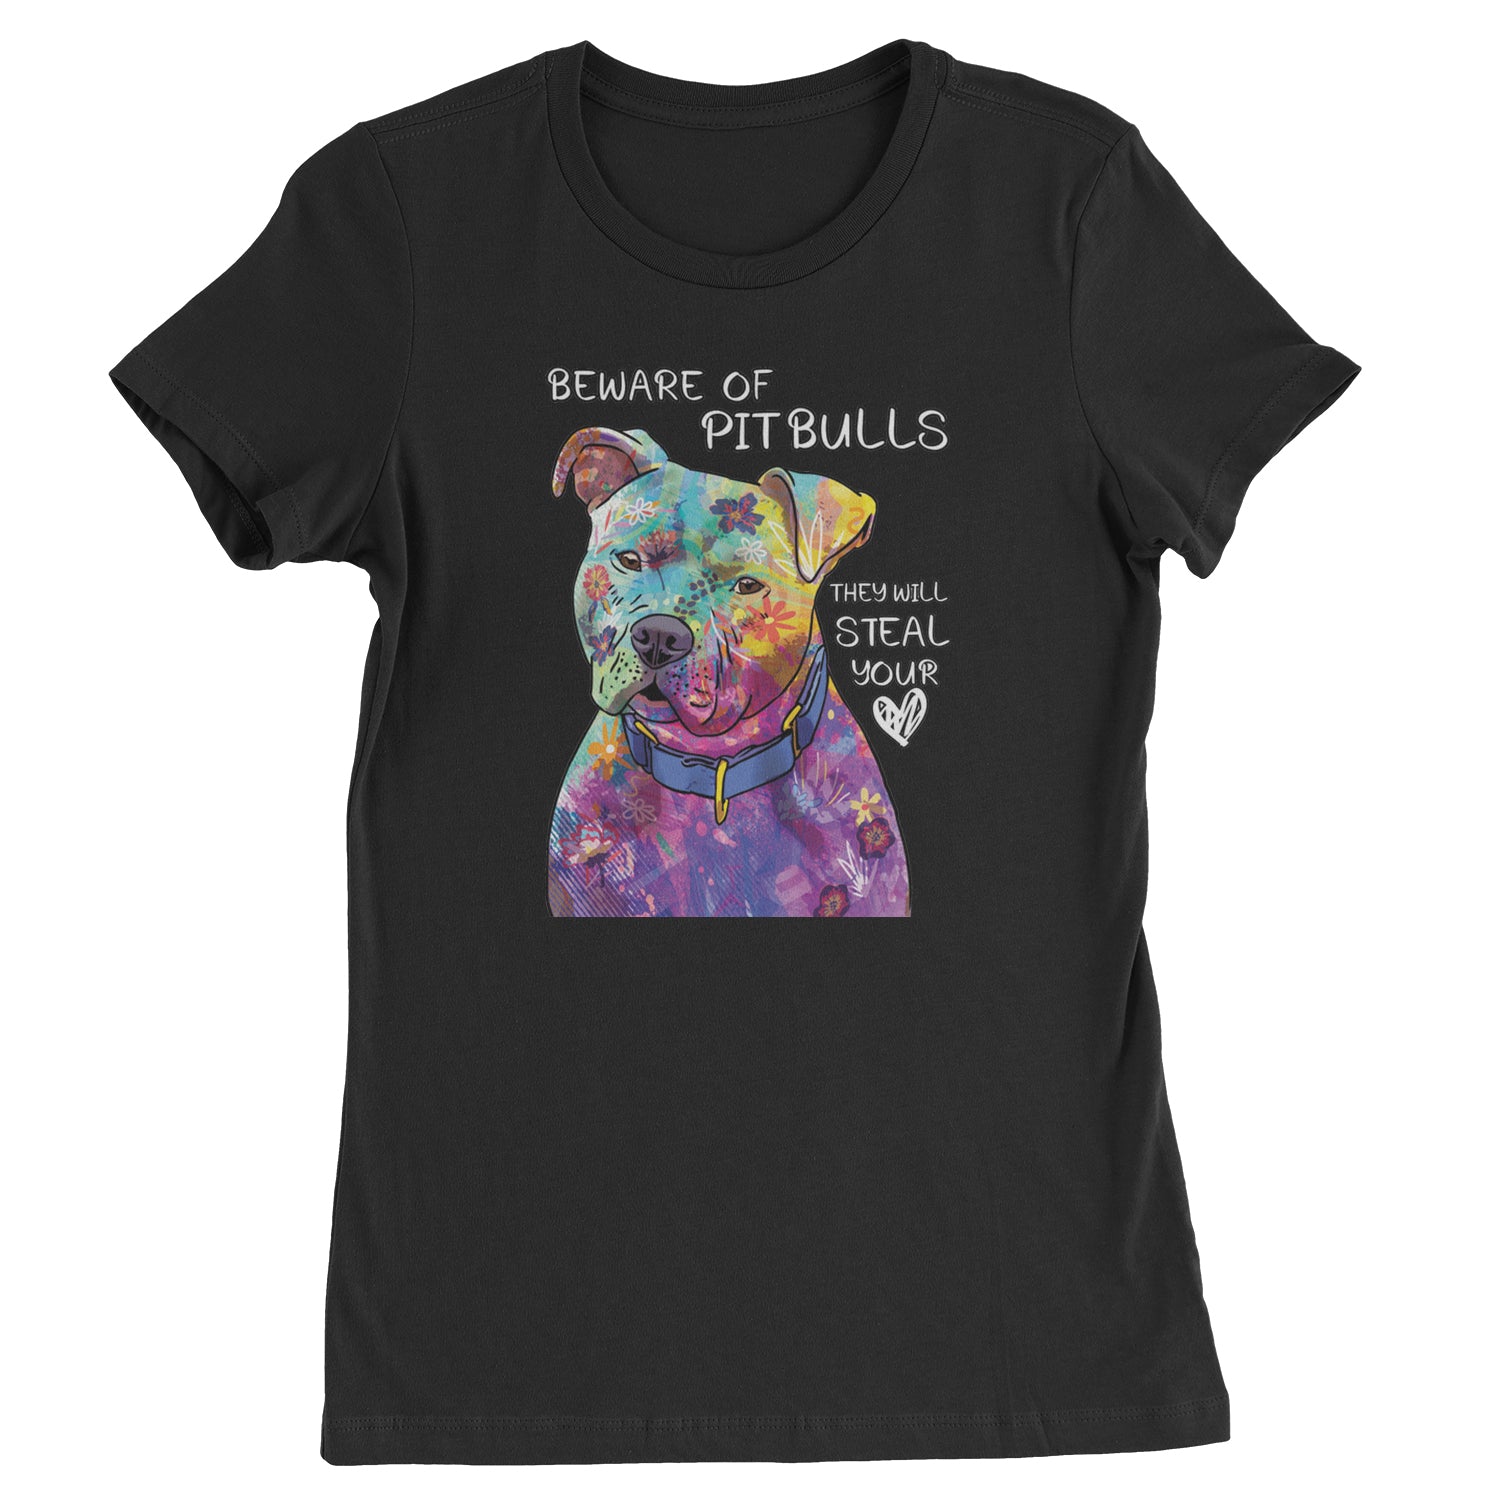 Beware Of Pit Bulls, They Will Steal Your Heart  Womens T-shirt